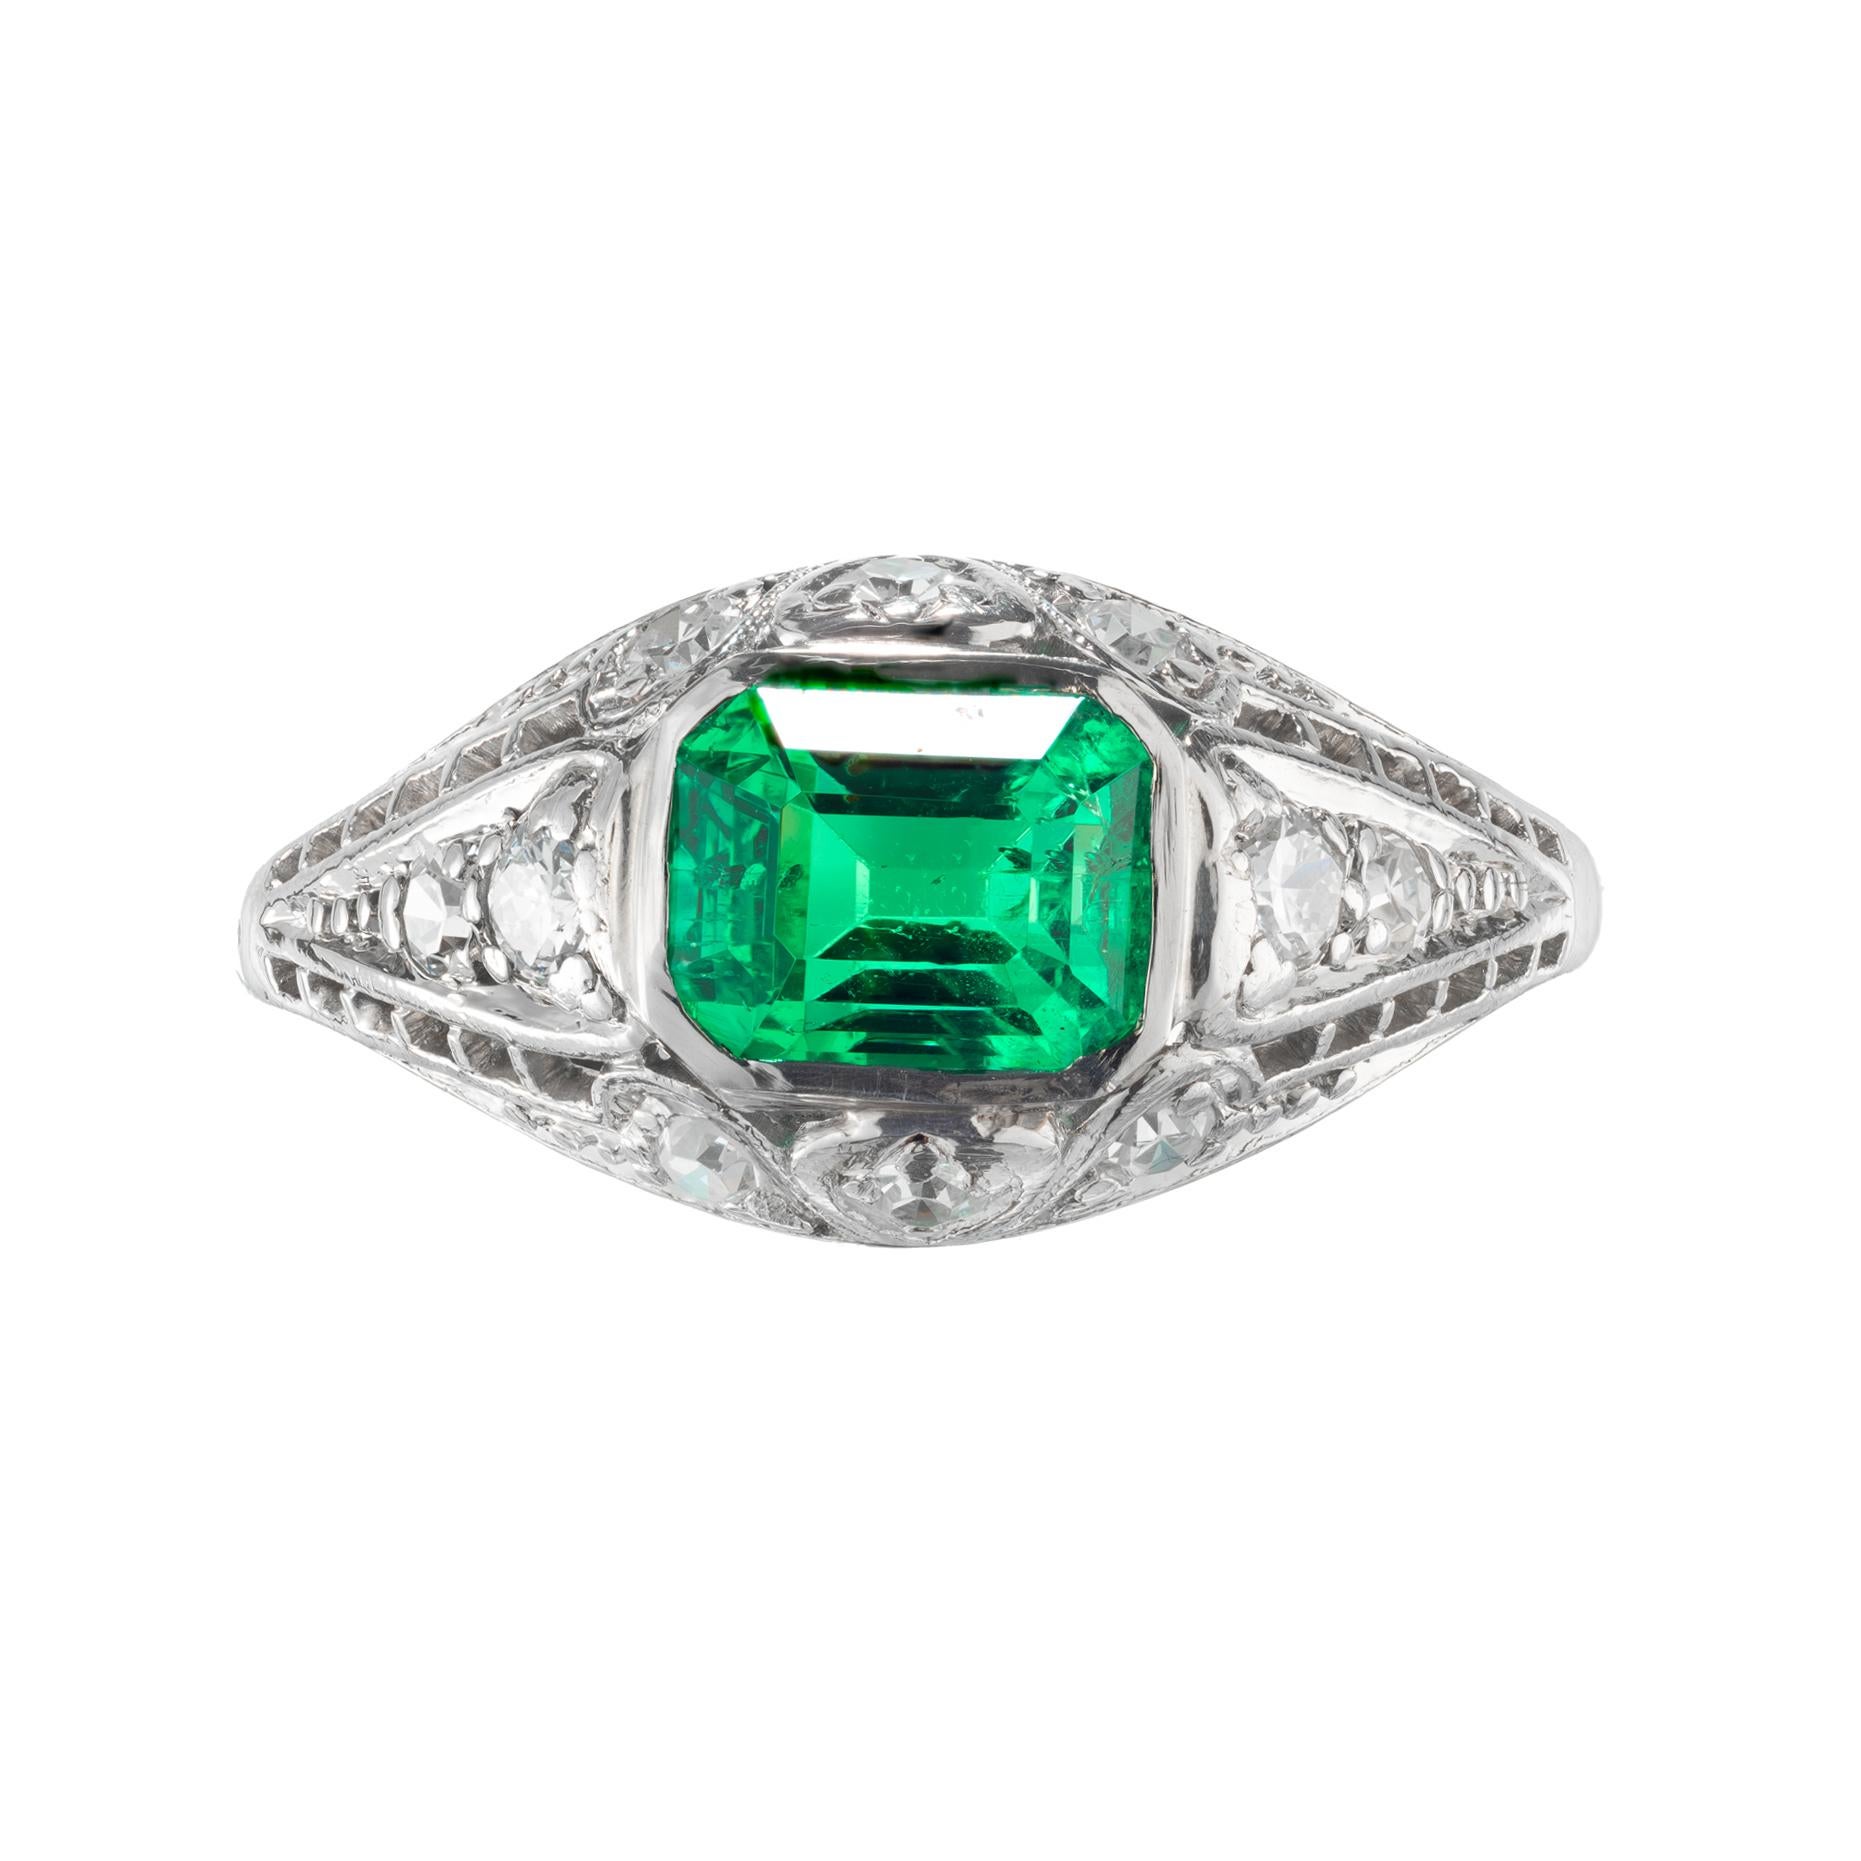 Ultra-bright emerald cut emerald and diamond engagement ring. GIA certified Colombian emerald center stone set in a handmade Art Deco filigree setting with ten sing cut accent diamonds. Circa 1930's 

1 octagonal bright green emerald, approx. .92cts